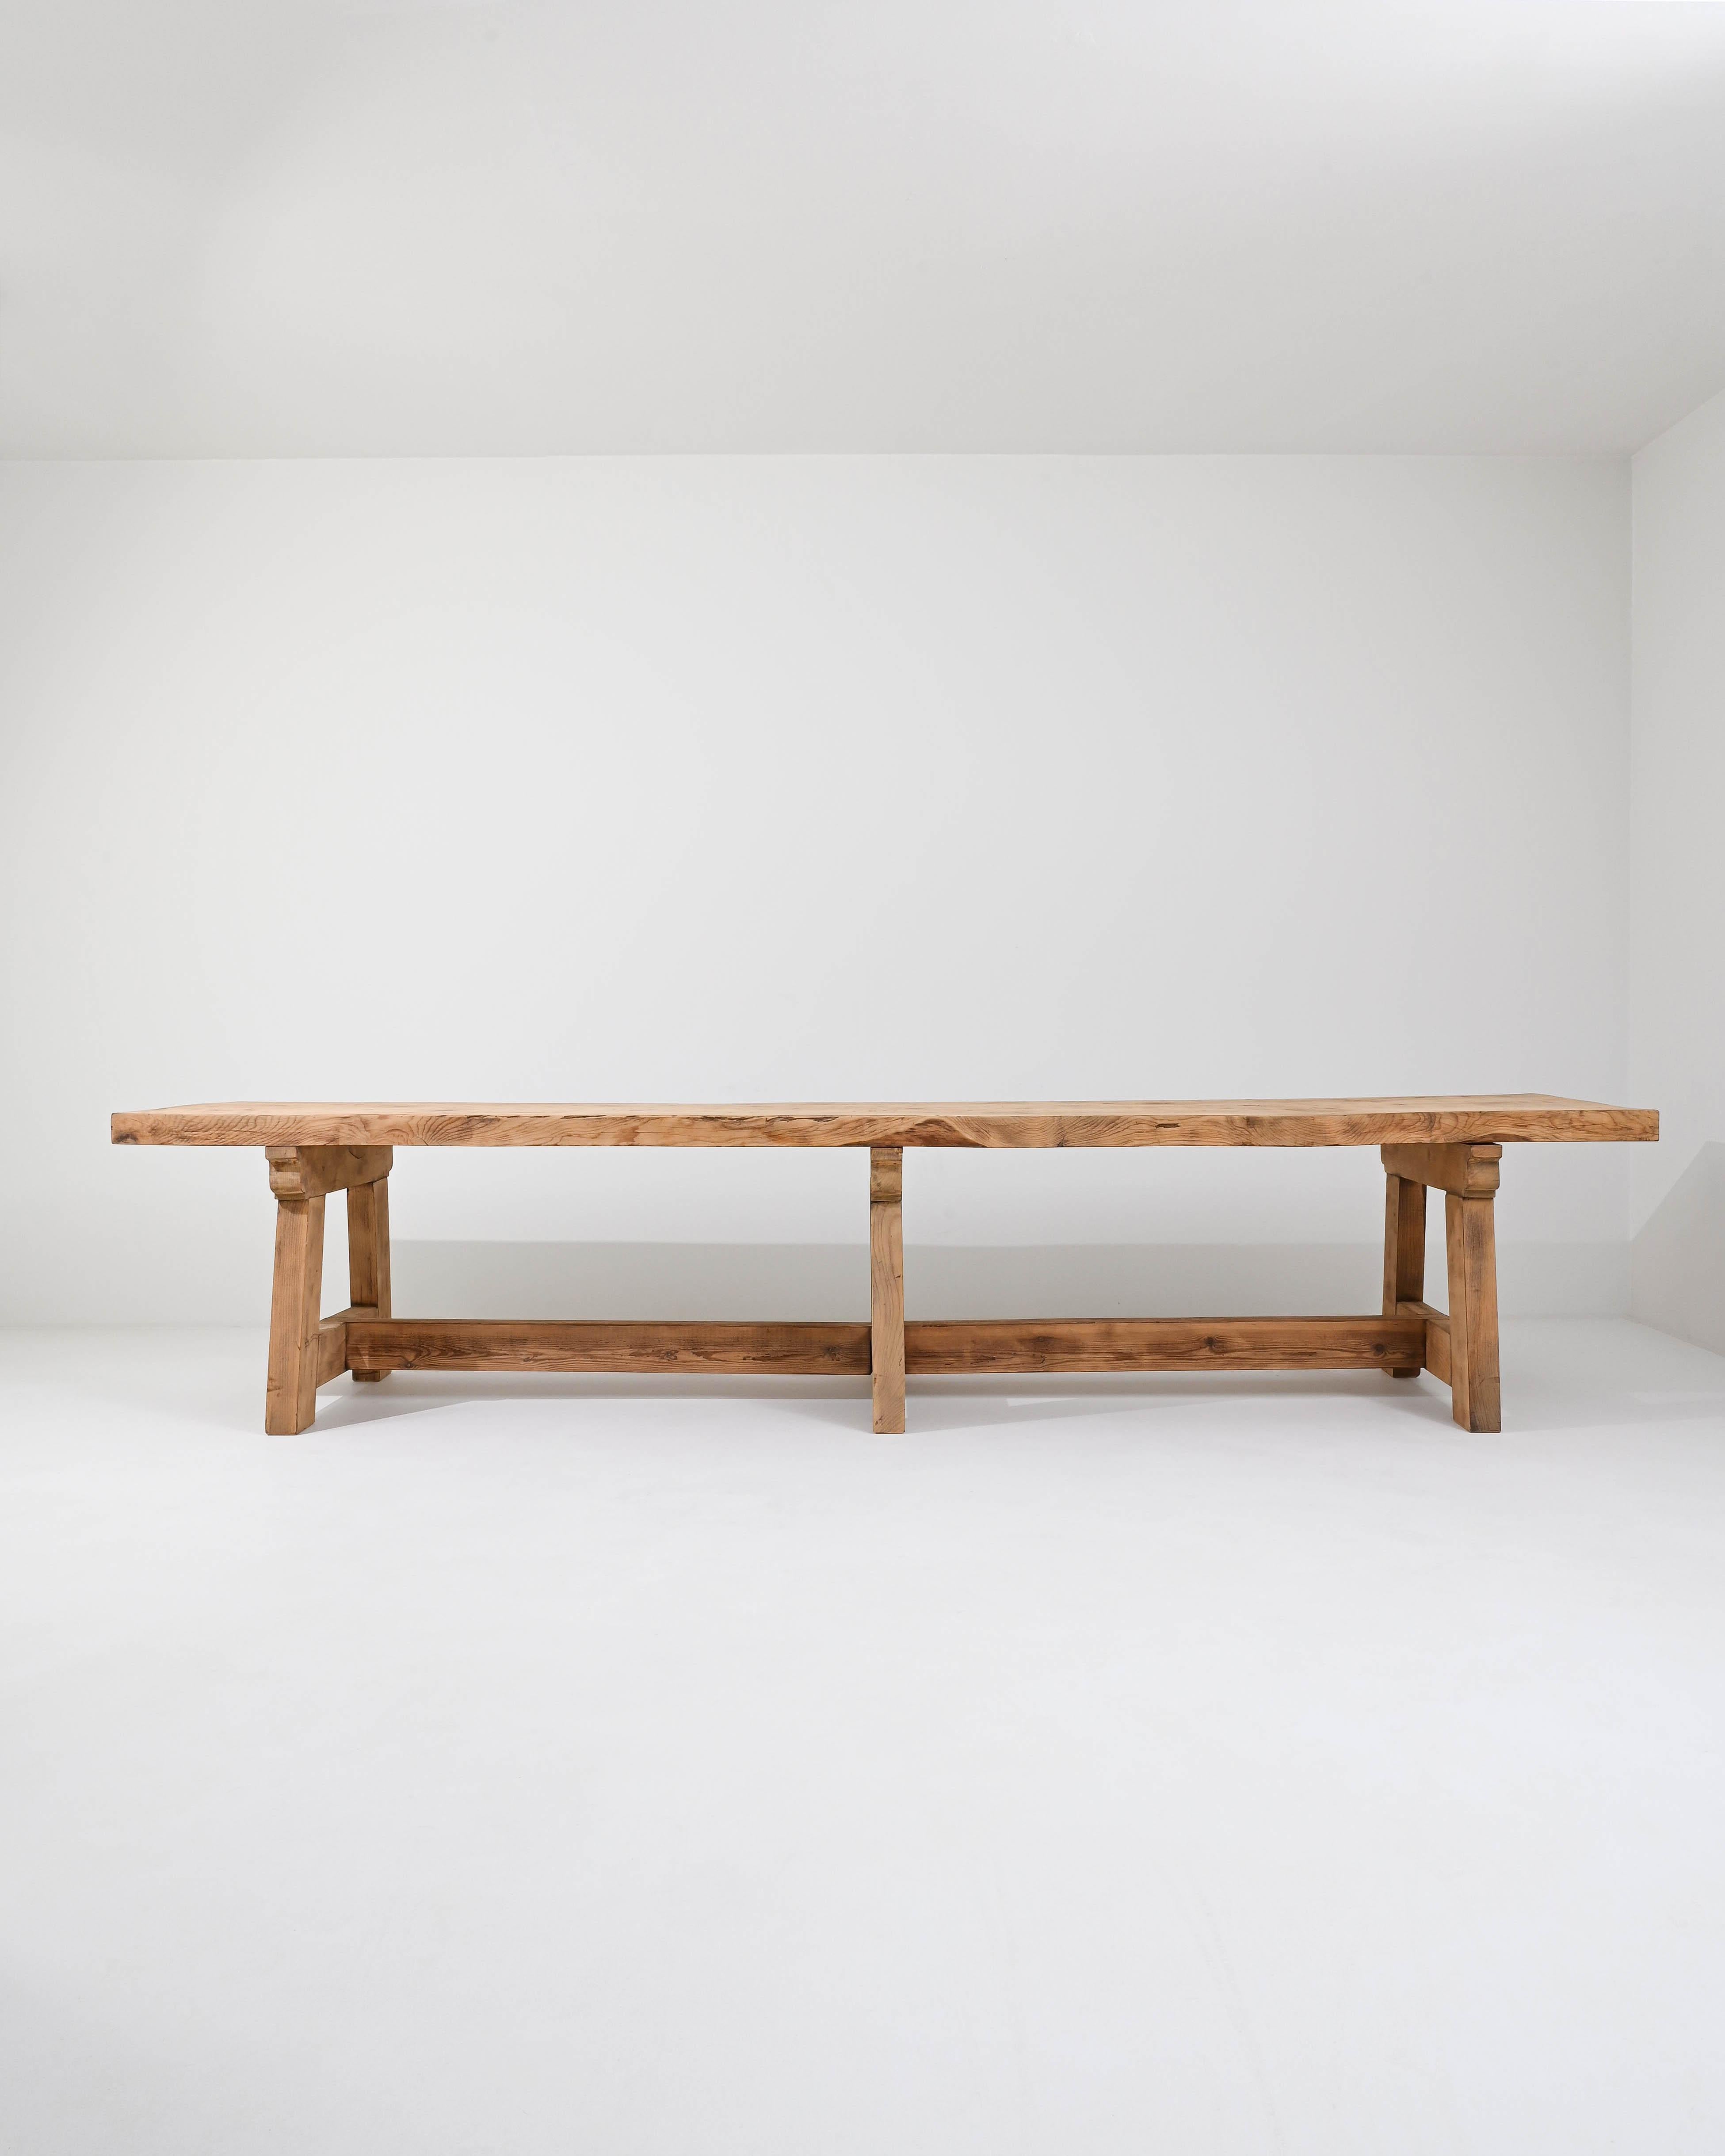 A wooden dining table made in France. Two staggering thick planks of wood combine to create a solid slab that composes the distressed top of this table. Weighty legs and stretcher bars form a geometrically pleasing latticework of joinery below,